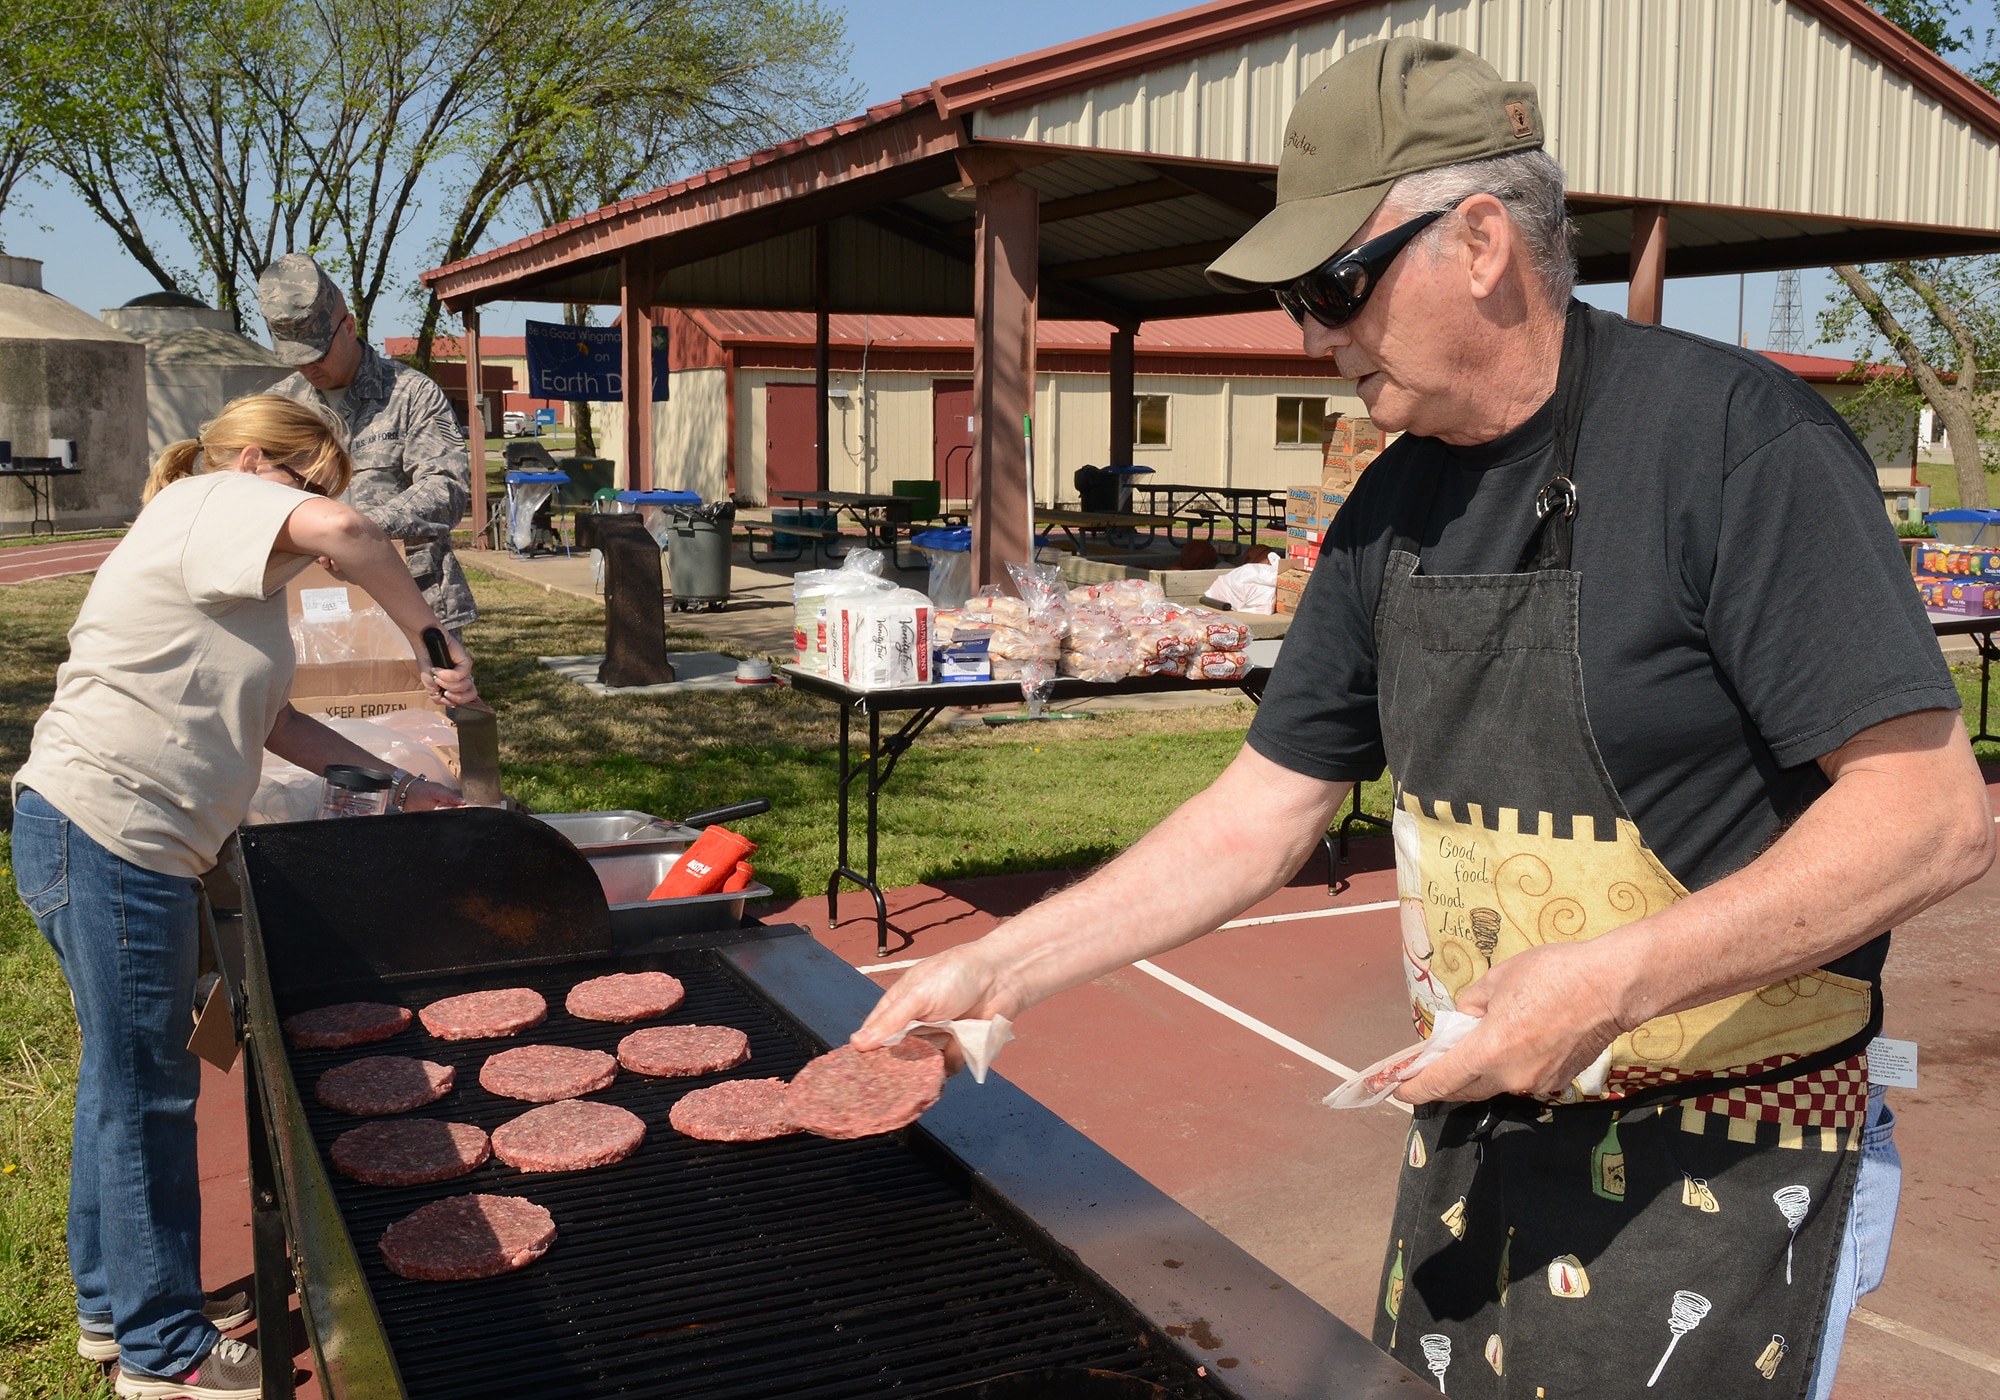 Master Sergeant Don Herbert (Ret.) cooks hamburgers in preparation for Earth Day celebration at the 138th Fighter Wing, 22 April 2014.  The 138th FW Environmental Management office organized a cookout and other green activities to celebrate the day at the Tulsa Air National Guard base, Tulsa Okla.  (U.S. National Guard photo by Senior Master Sgt.  Preston L. Chasteen/Released)